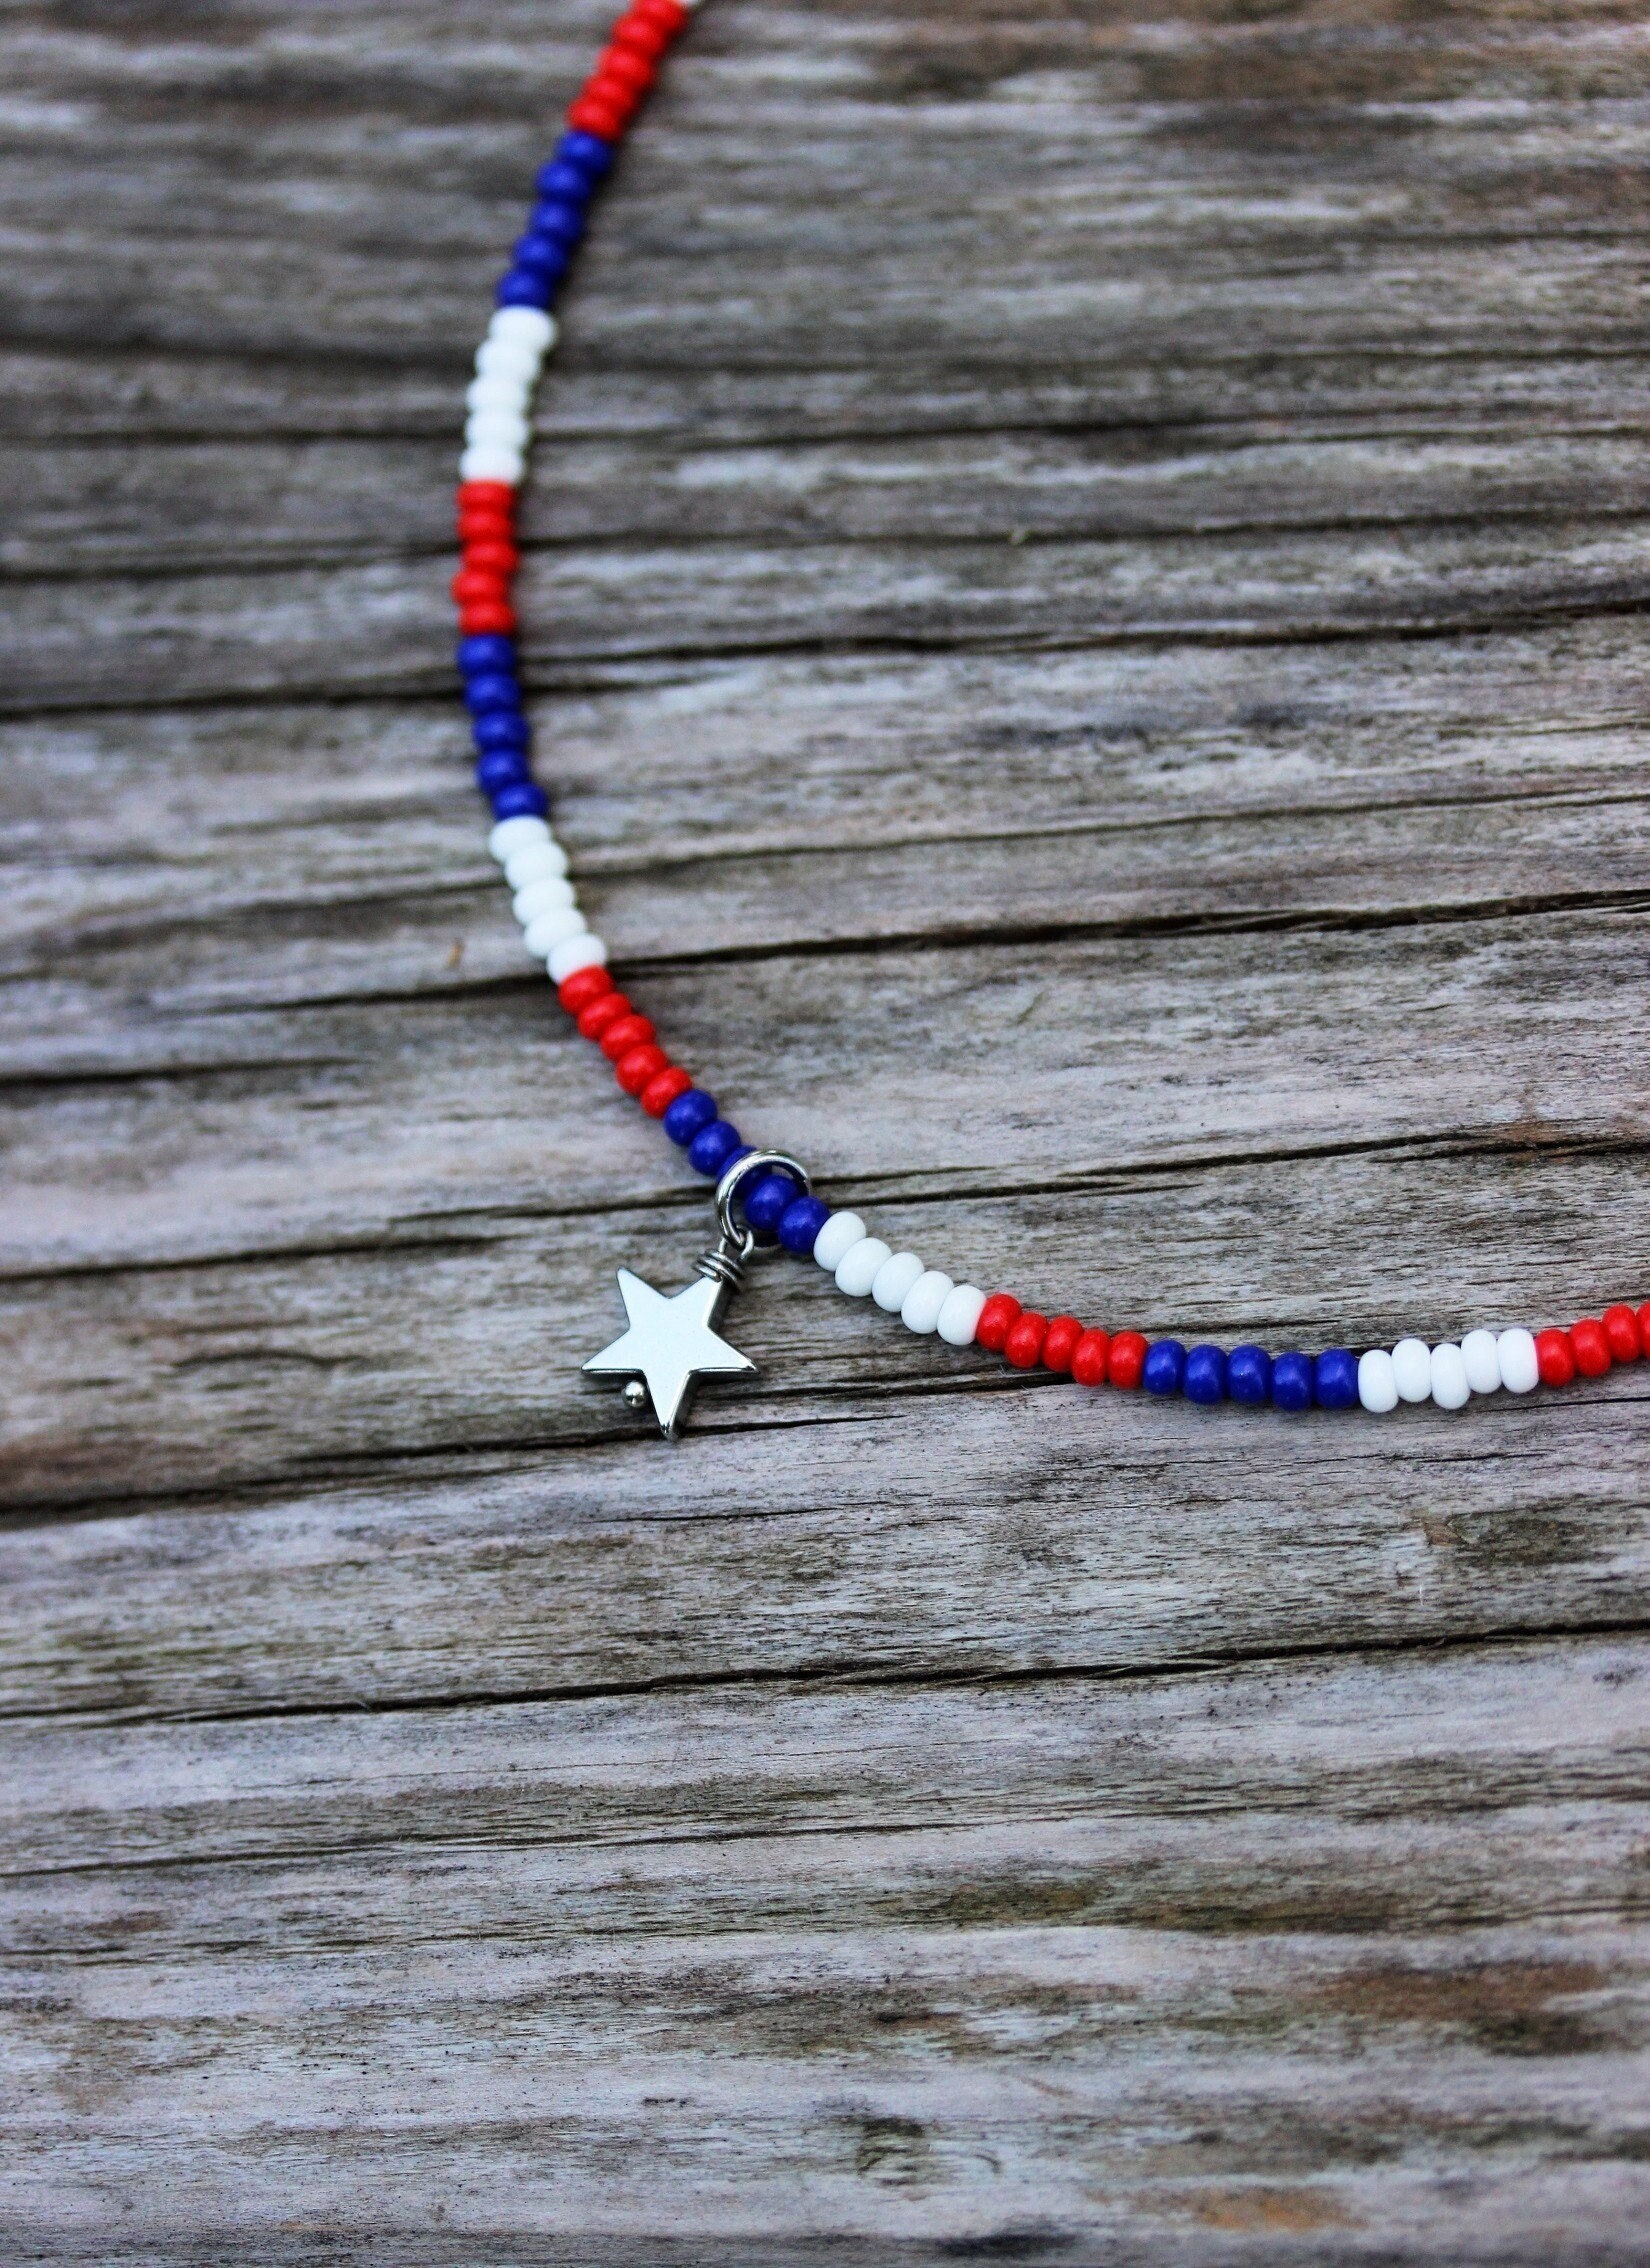 Amazon.com: 4th of July Necklace Accessories, 12PCS Independence Day Light  up Necklace, Fourth of July Necklace 7 Bulb Red Blue Whtie Stars, Glow  Necklaces Bulk Flag Day Patriotic Themed Parades Parties Favors :